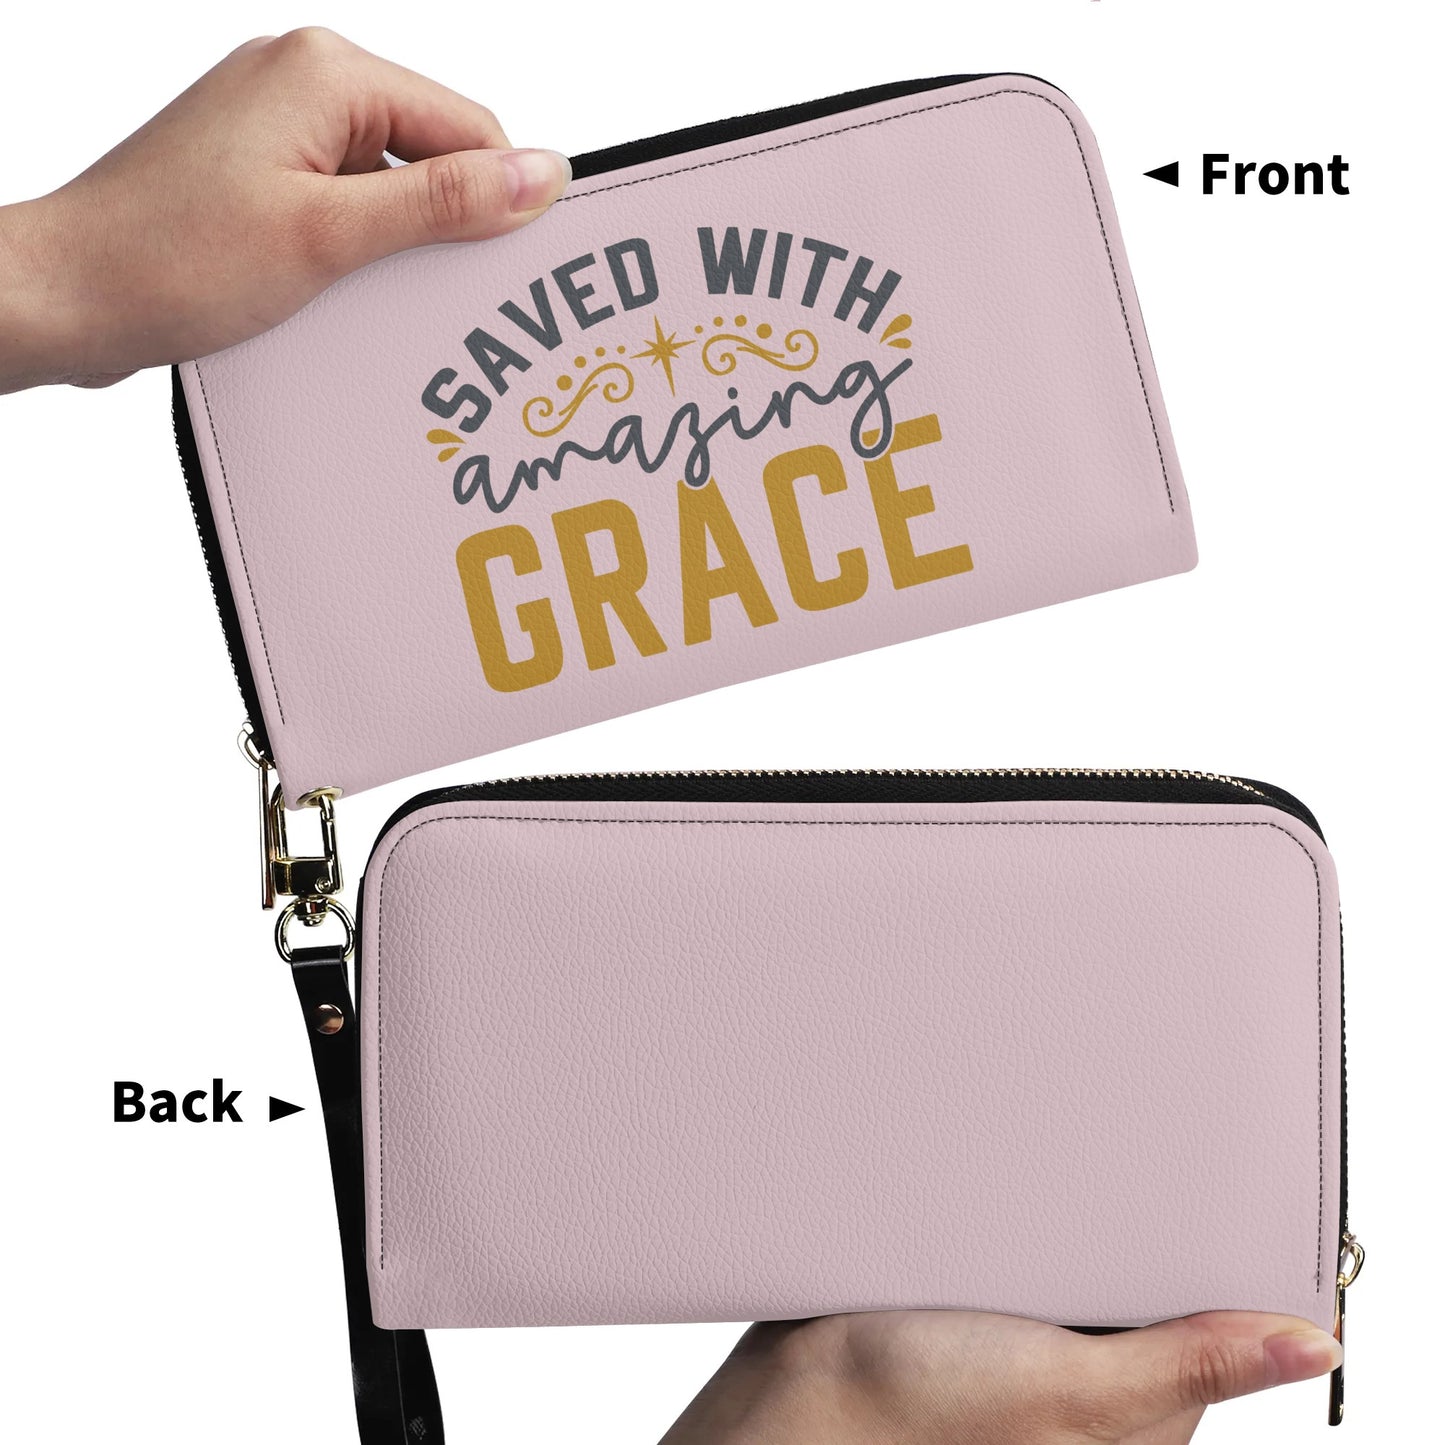 Saved With Amazing Grace PU Leather Womens Christian Wallet popcustoms